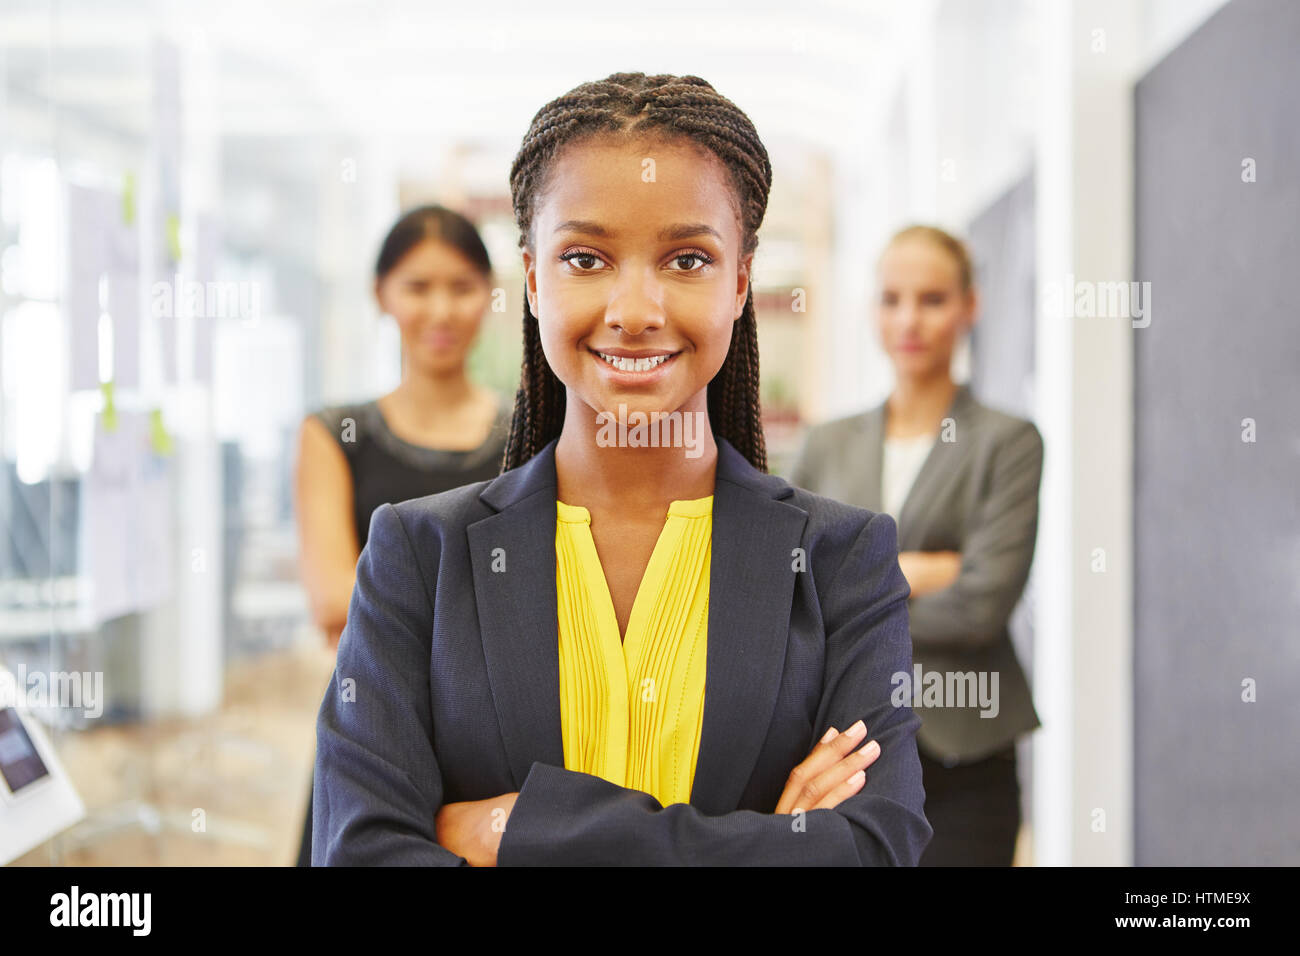 Student in her business apprenticeship for a consulting career Stock Photo